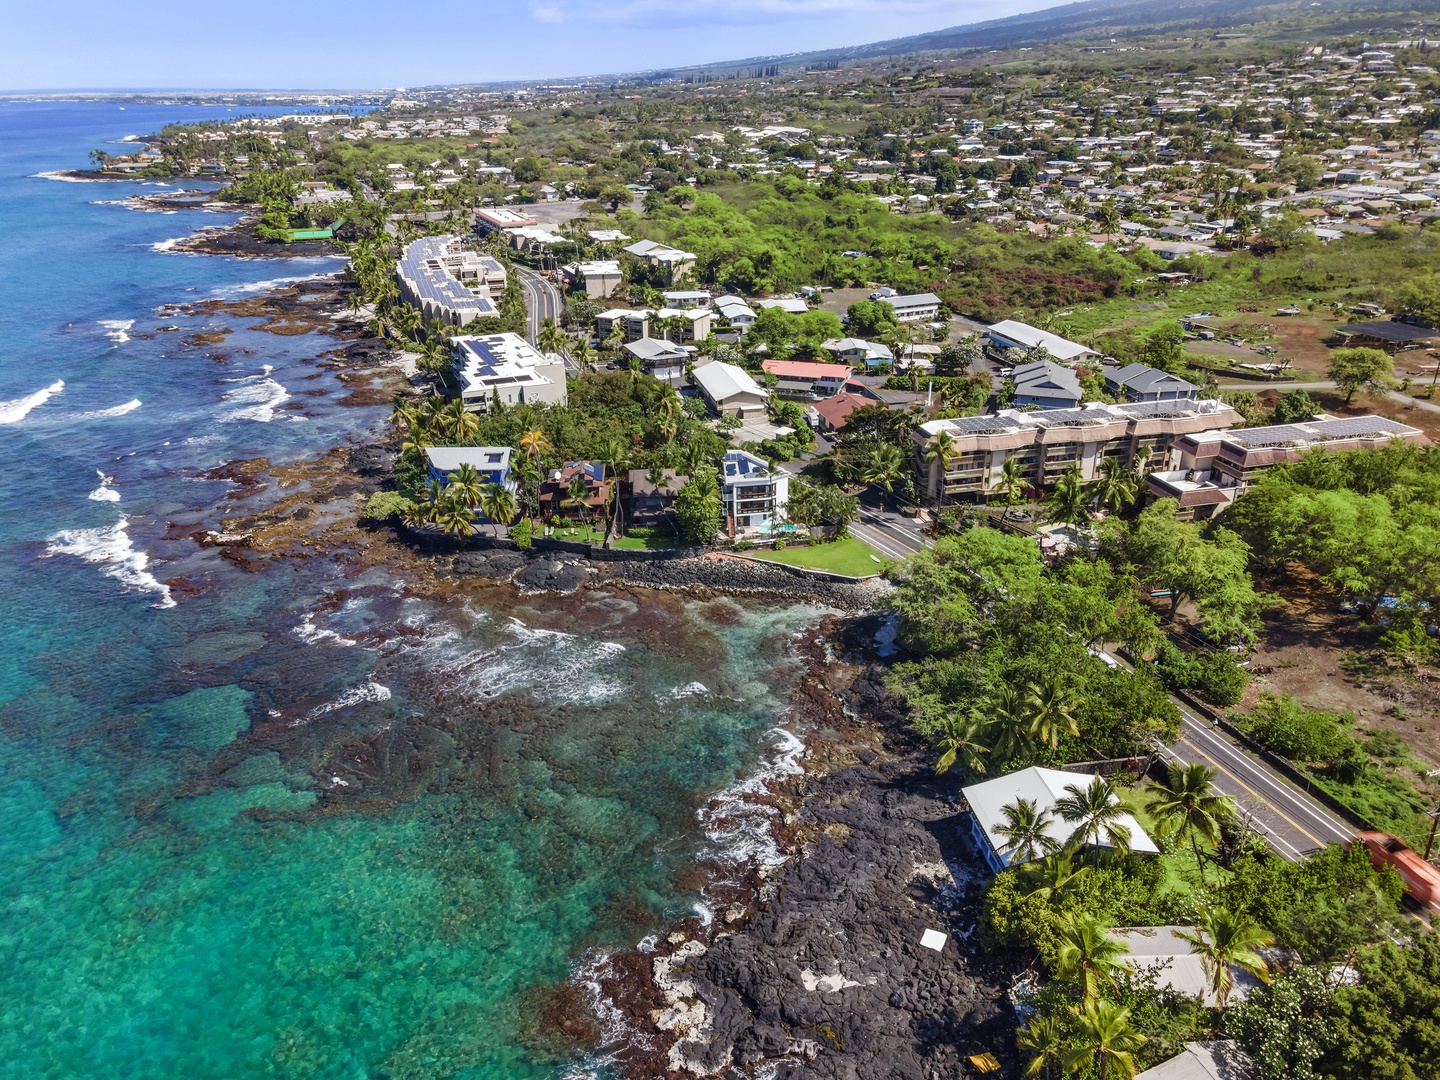 Kailua Kona Vacation Rentals, Kona's Shangri La - While Kona’s Shangri La truly is a utopia, Kailua-Kona does have a lot to offer–so you should definitely venture out to explore the town